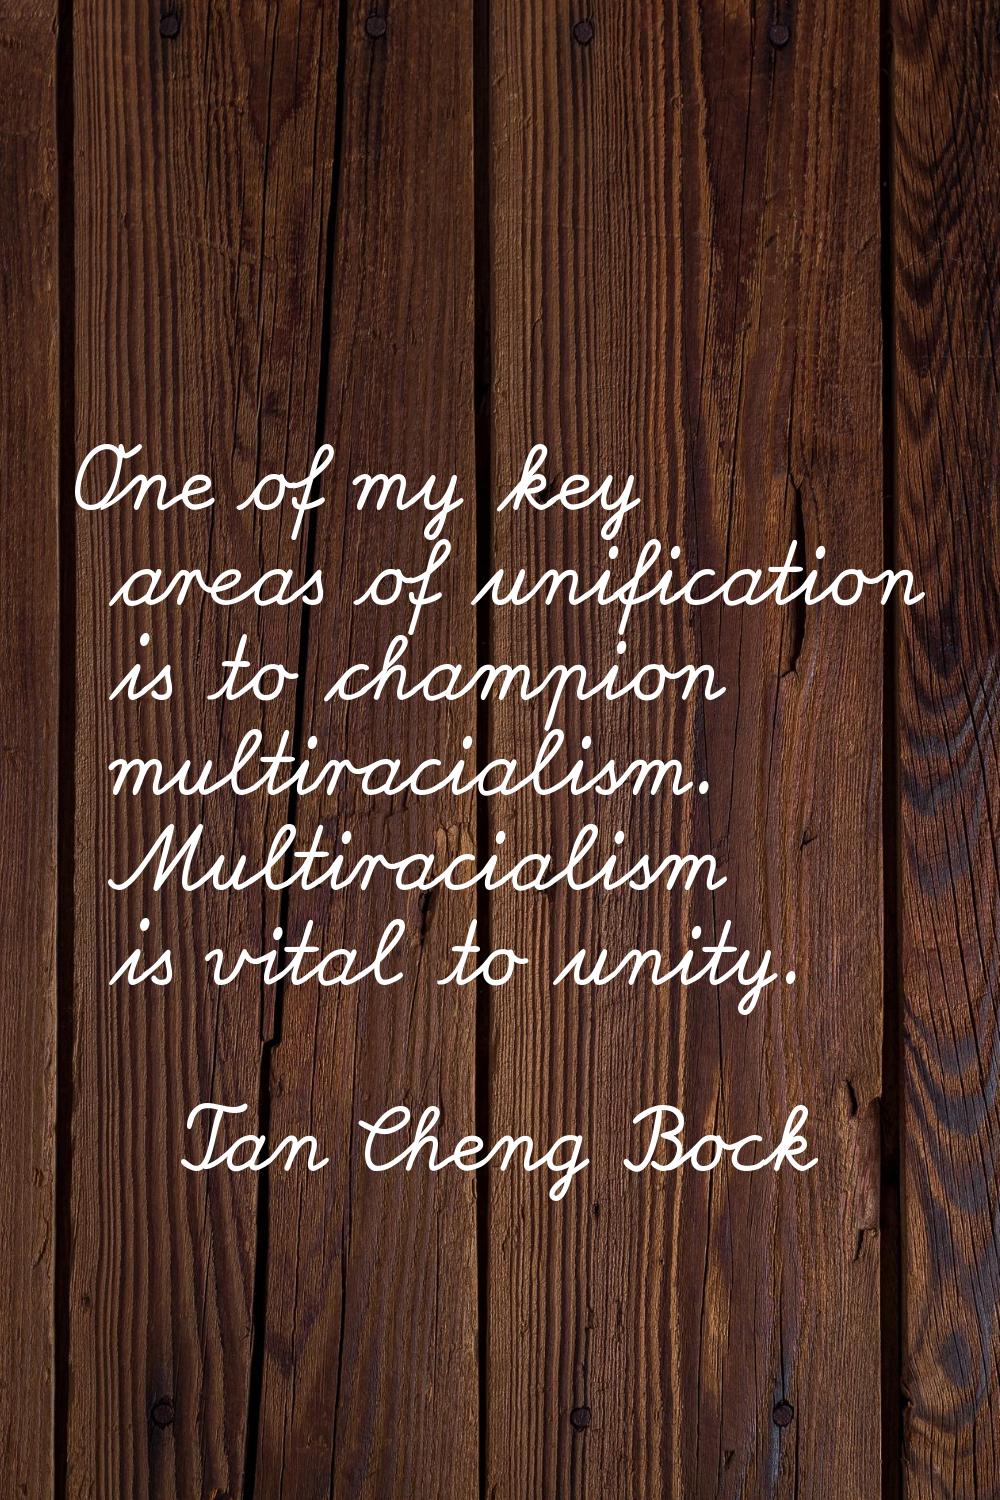 One of my key areas of unification is to champion multiracialism. Multiracialism is vital to unity.